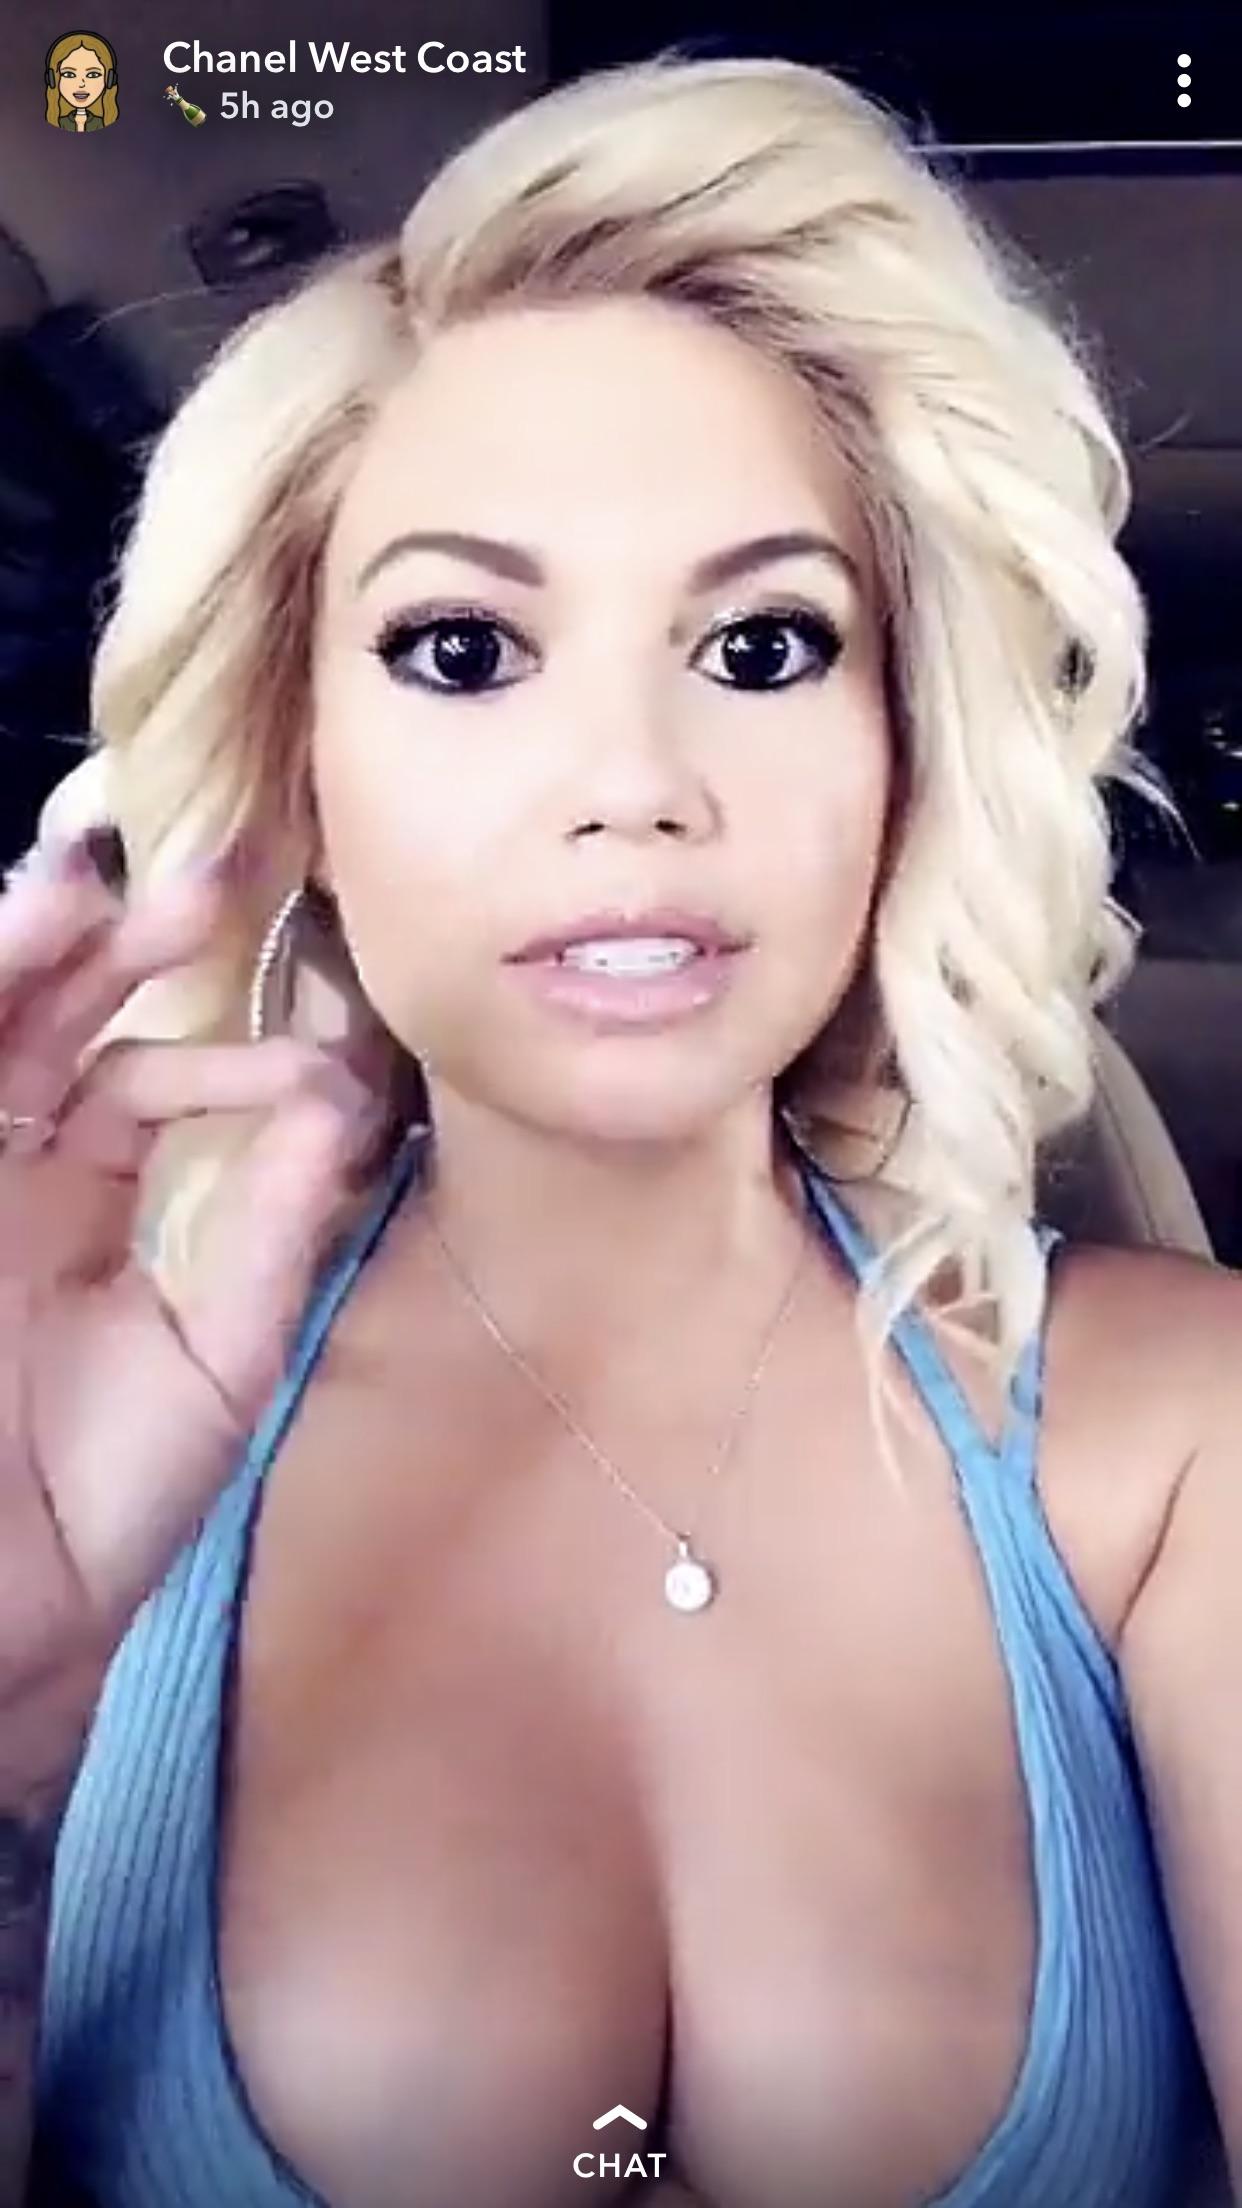 That cleavage is DEEP SON! : ChanelWestCoast